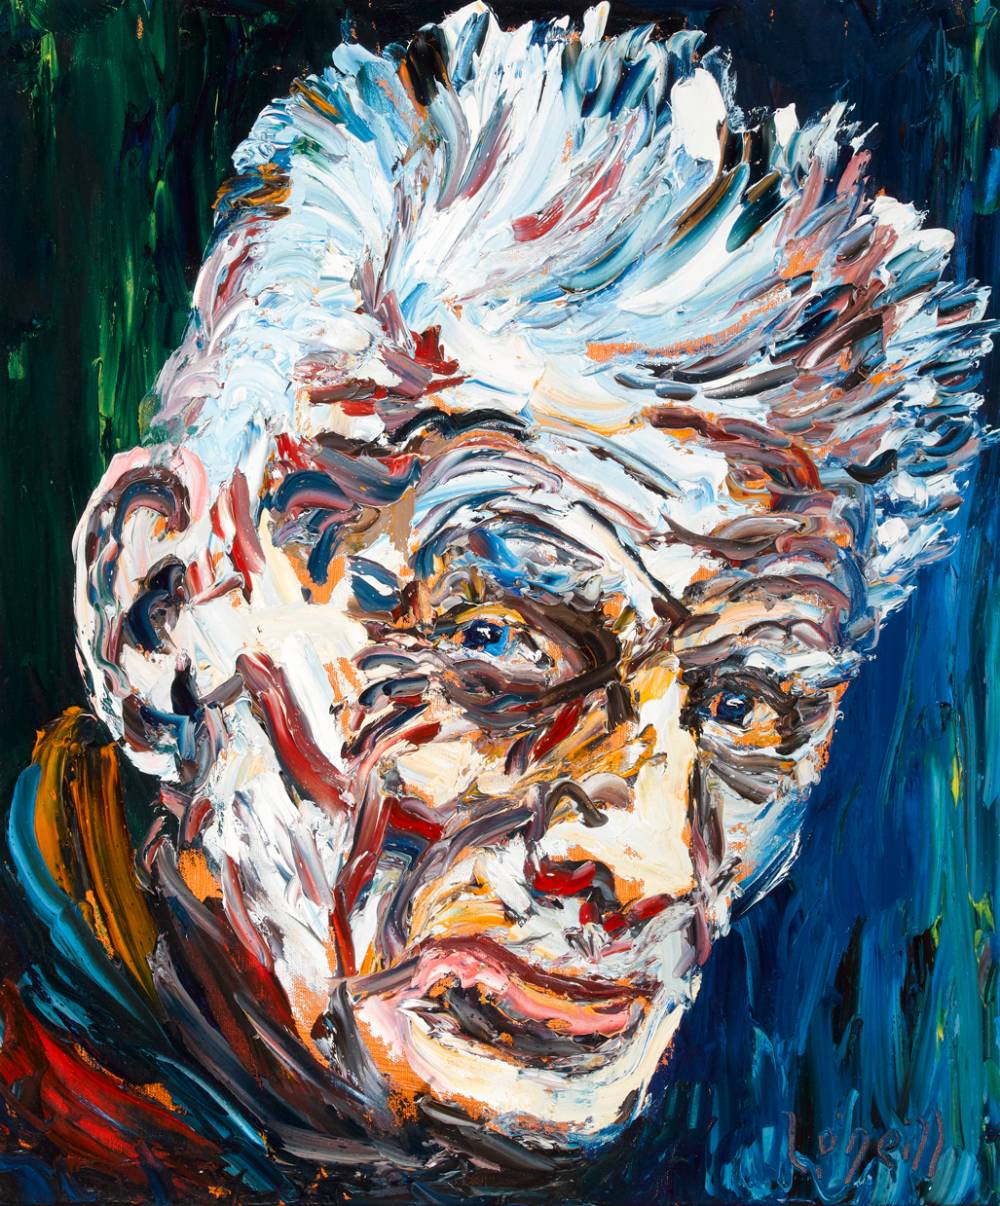 PORTRAIT OF SAMUEL BECKETT by Liam O’Neill (b.1954) (b.1954) at Whyte's Auctions